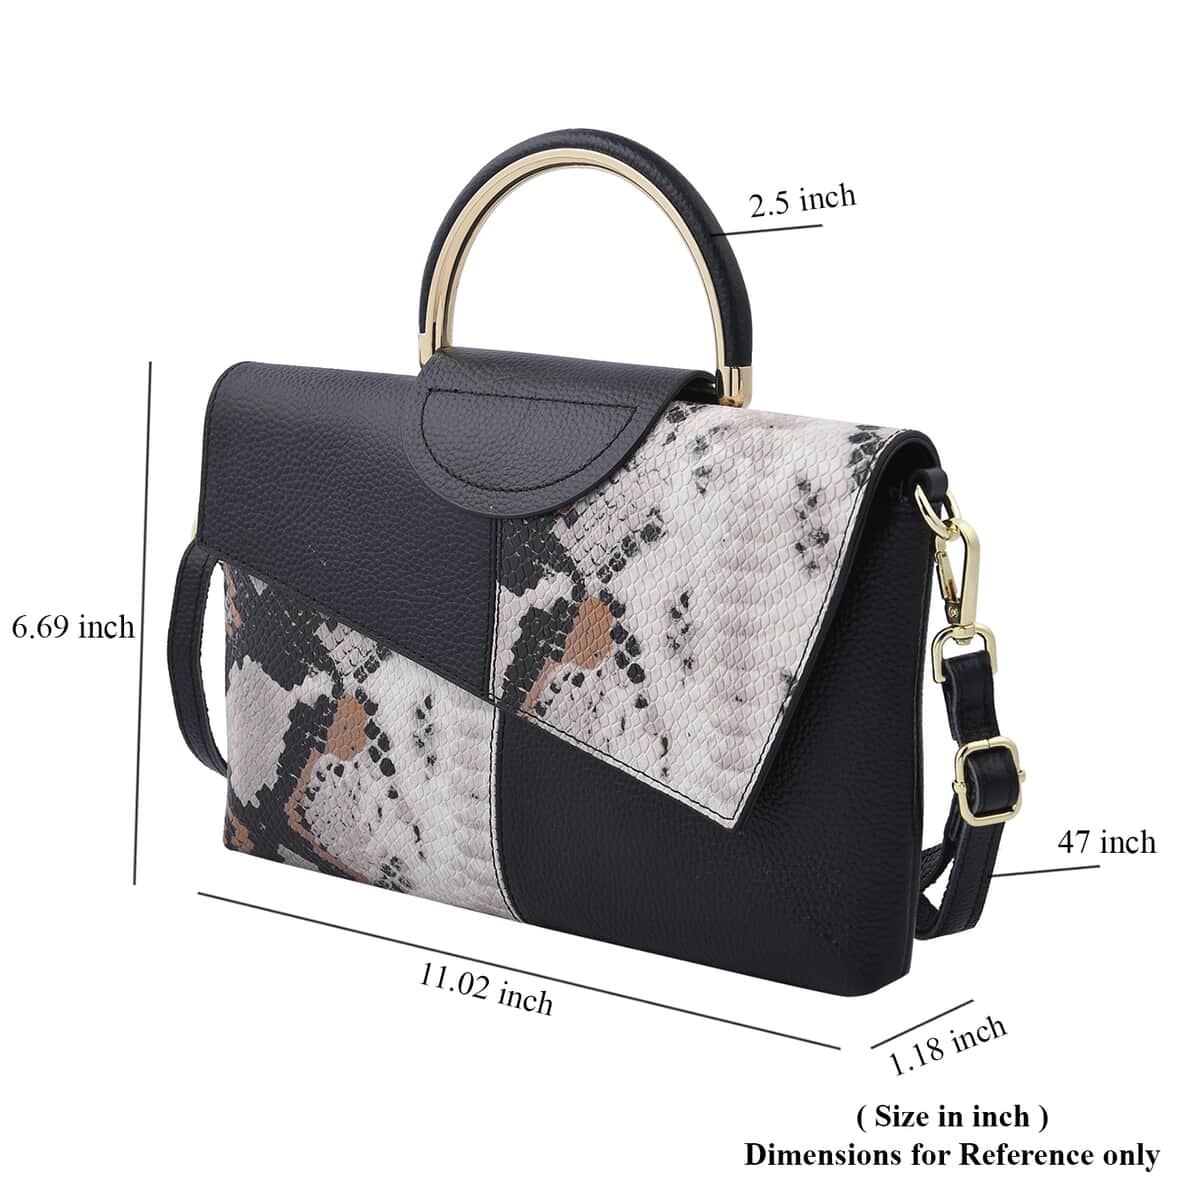 Closeout Deal Black and White Snake Print Genuine Leather Convertible Tote Bag (11.02"x1.18"x6.69") with Shoulder Strap image number 5